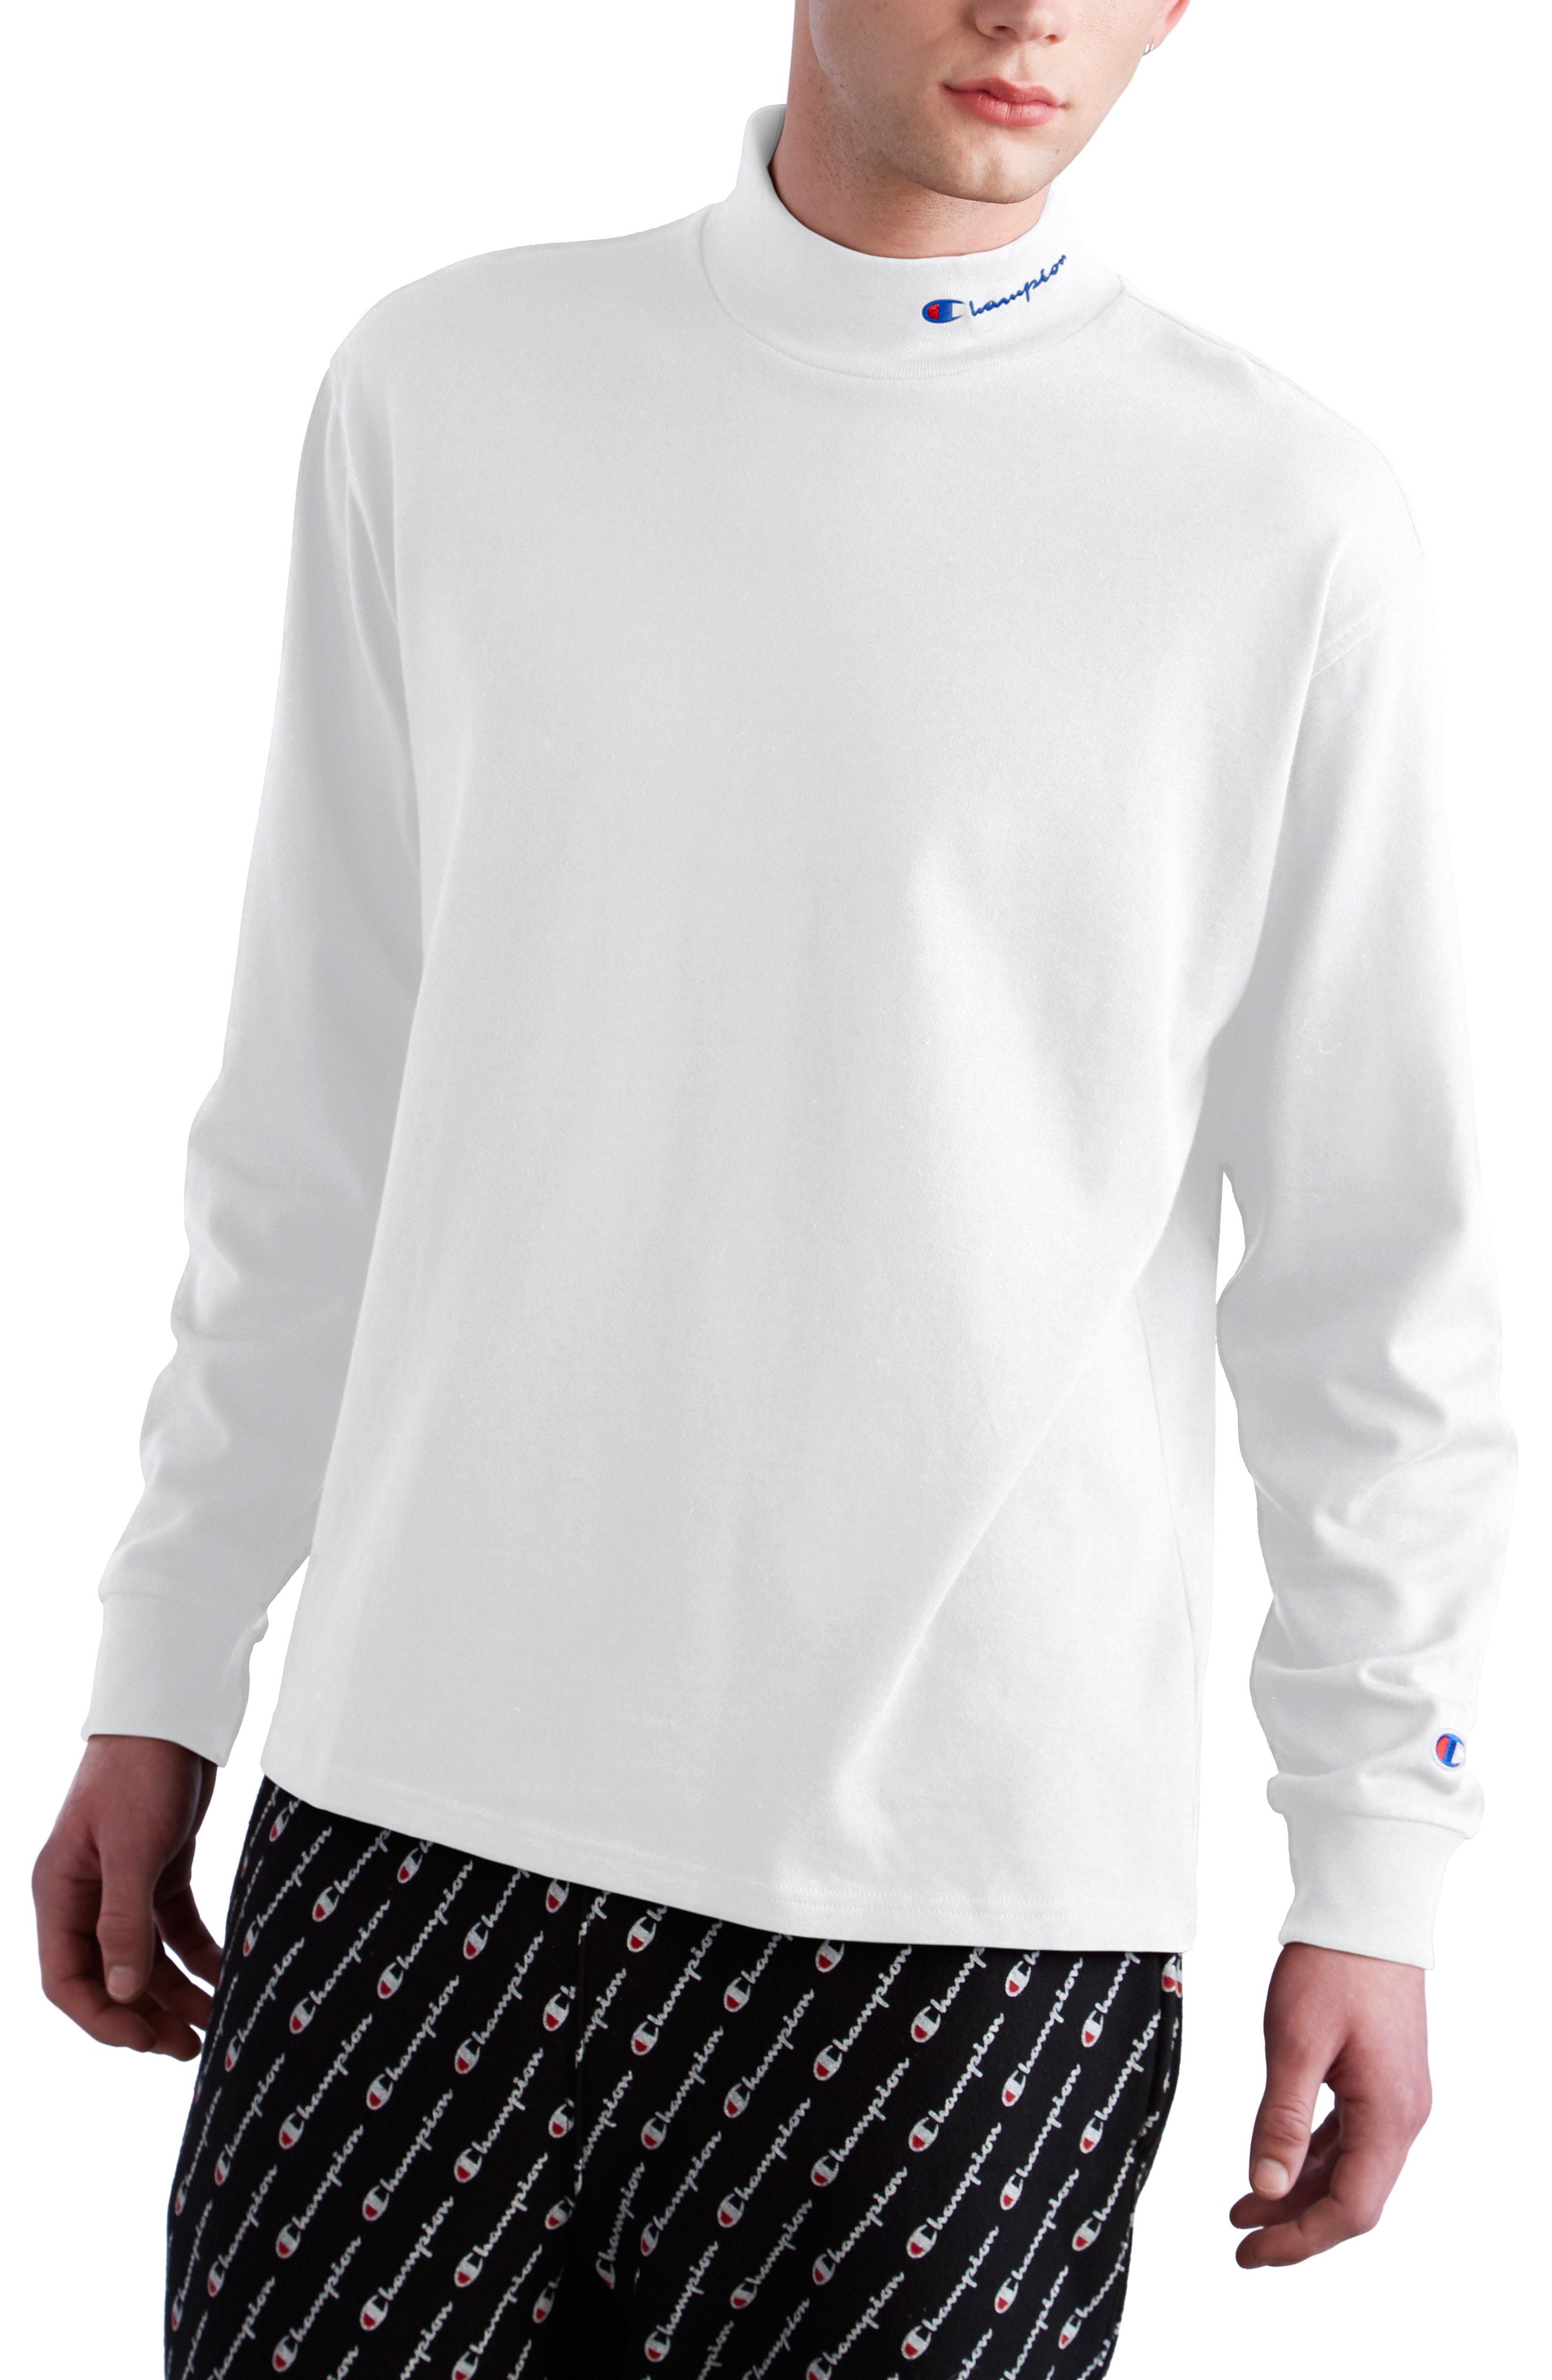 Lyst - Champion Heavyweight Mock Neck T-shirt in White for ...